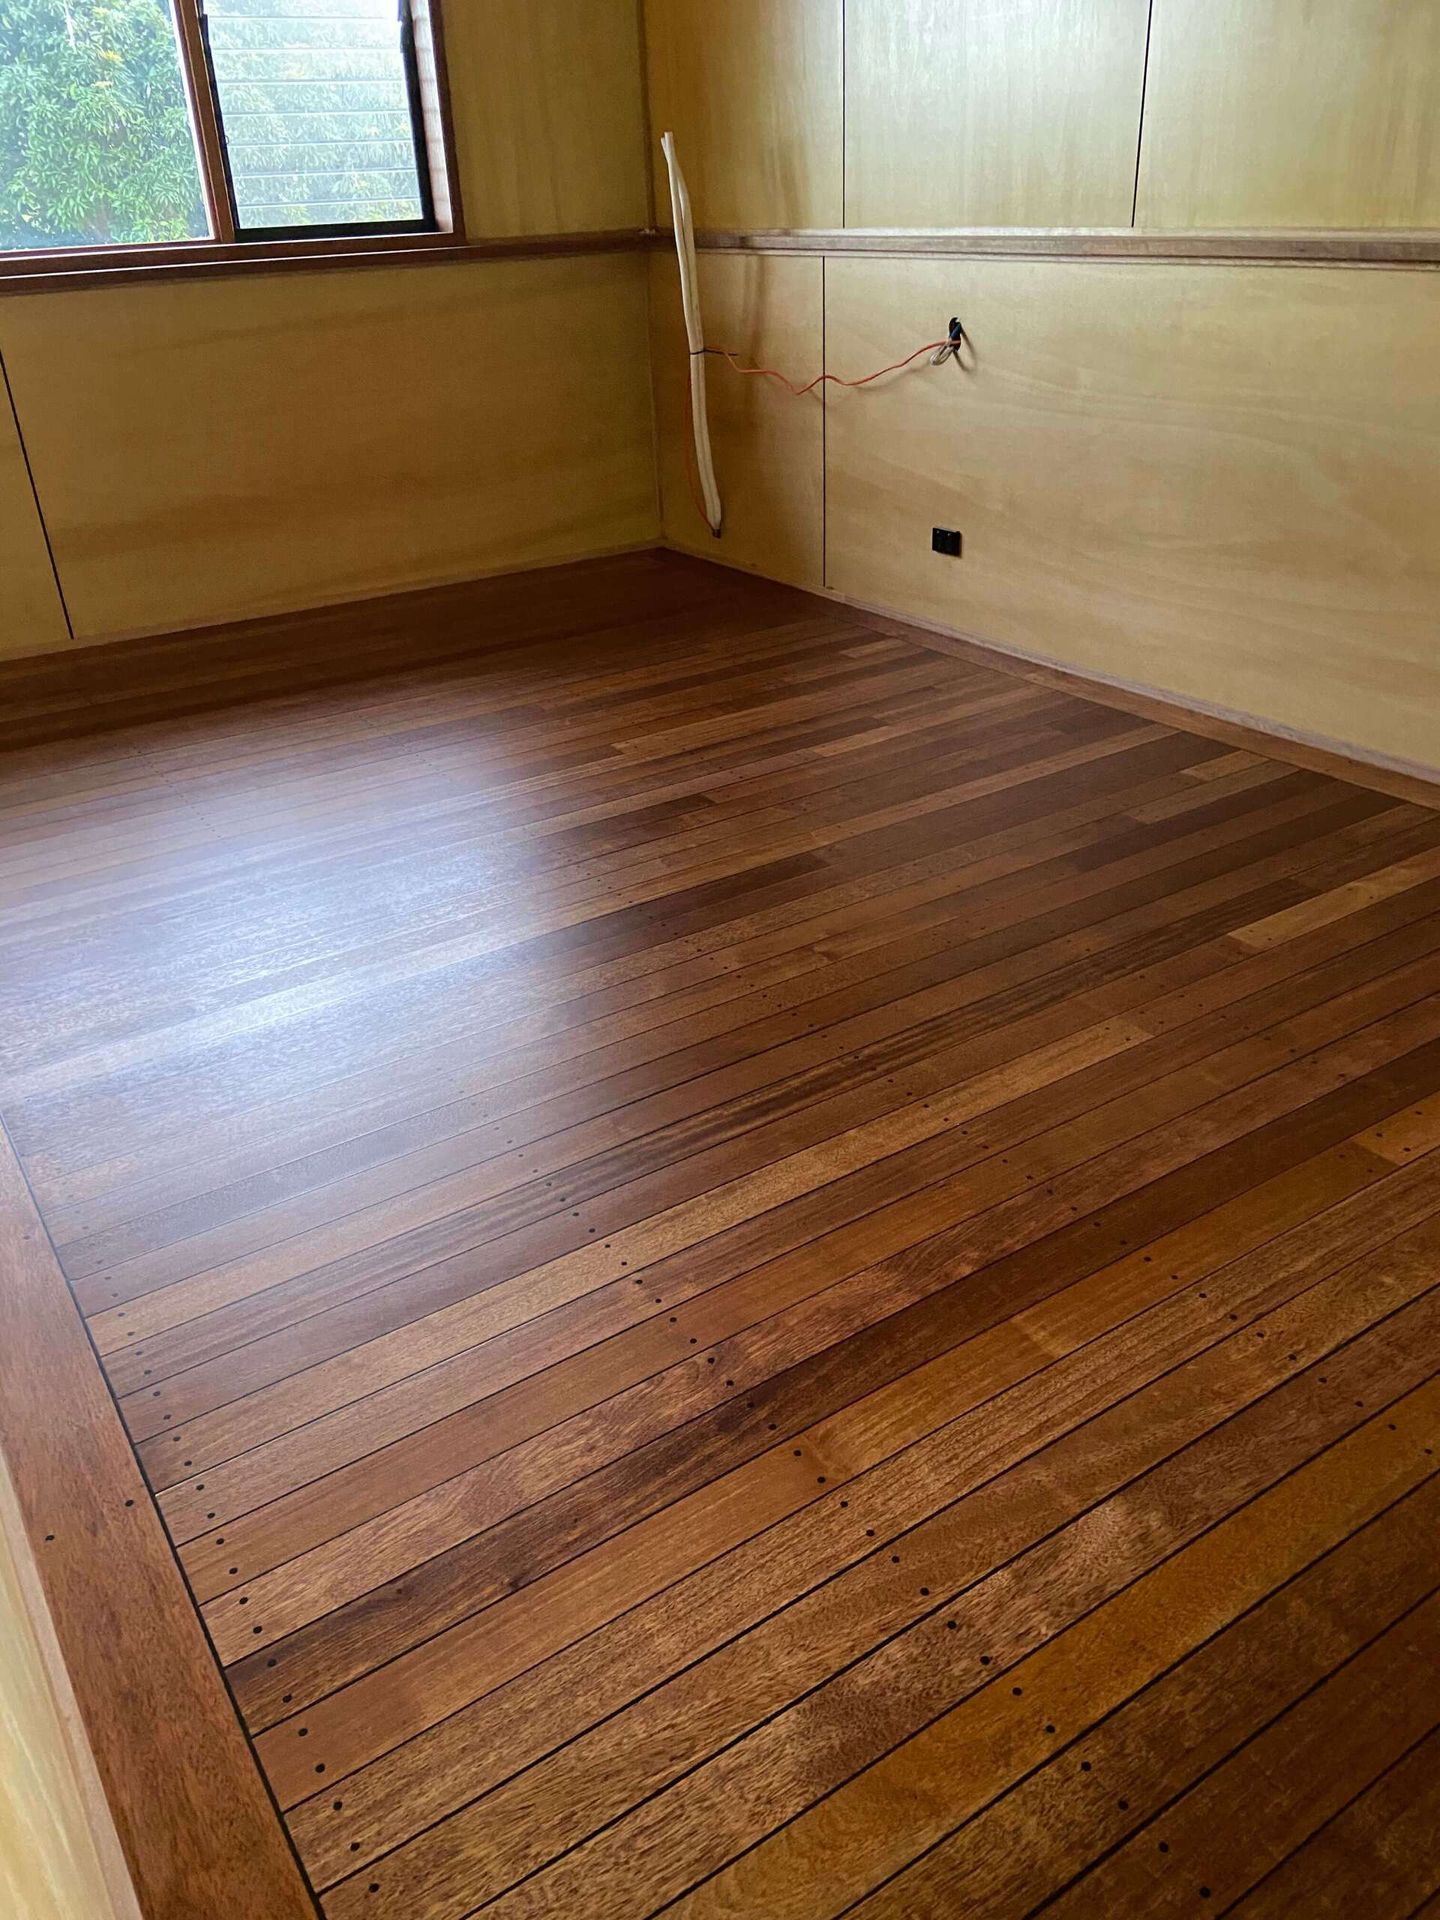 Before Timber Flooring — Dull Floors in Chinderah, NSW